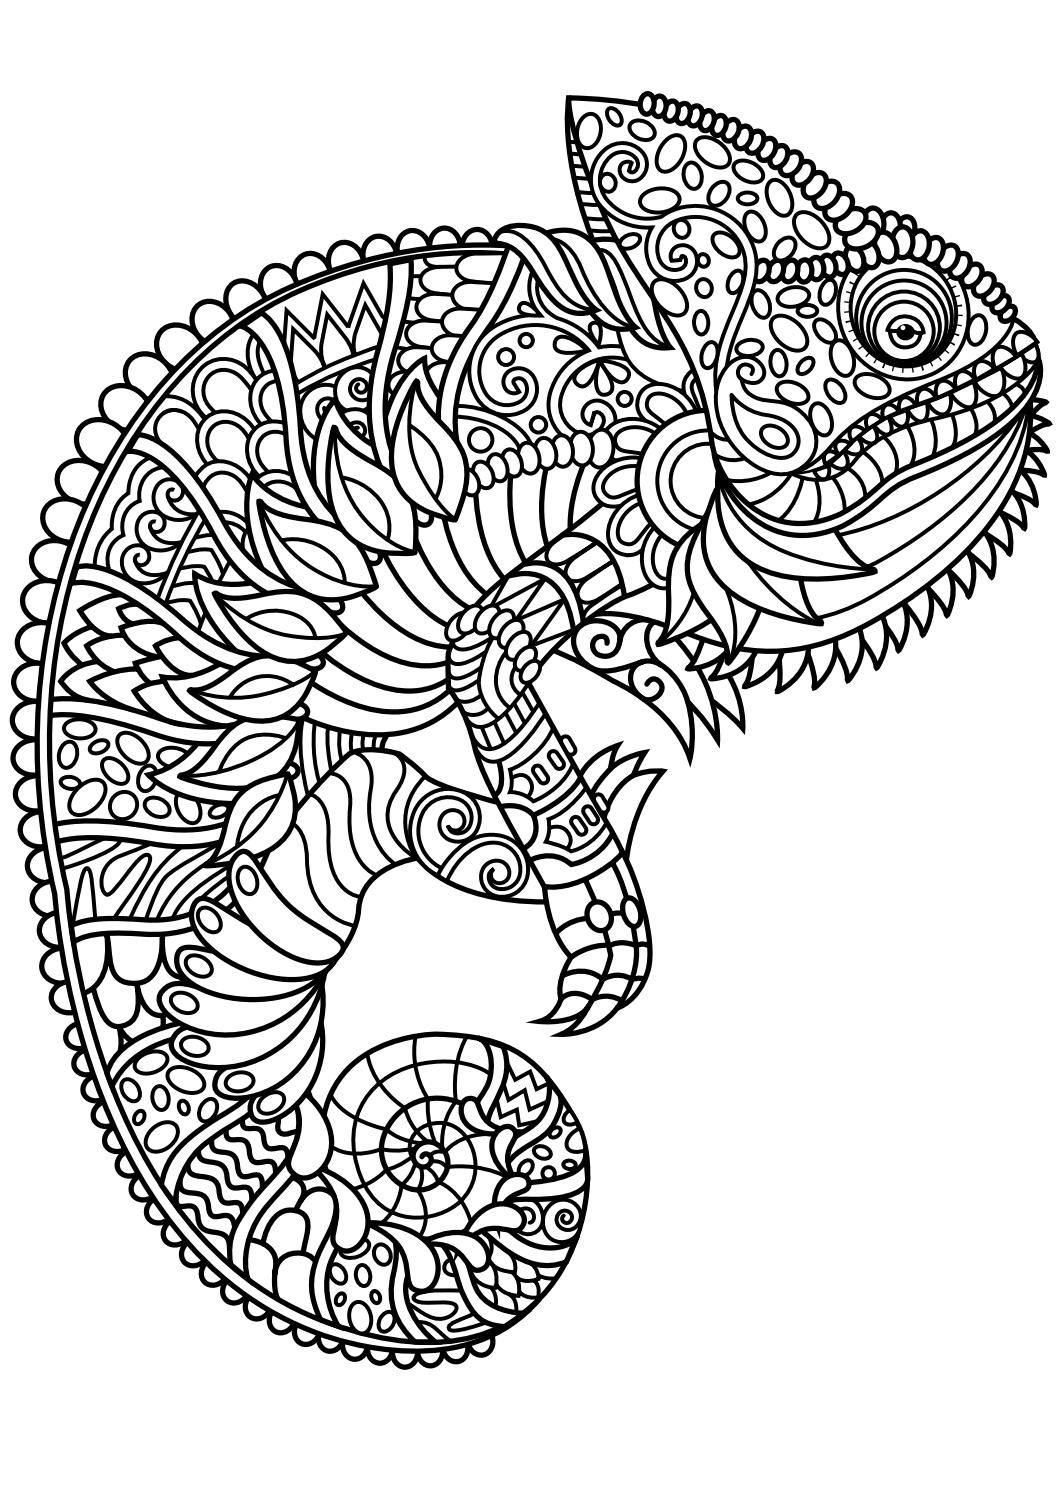 Fun Coloring Pages For Adults at GetColoringscom Free